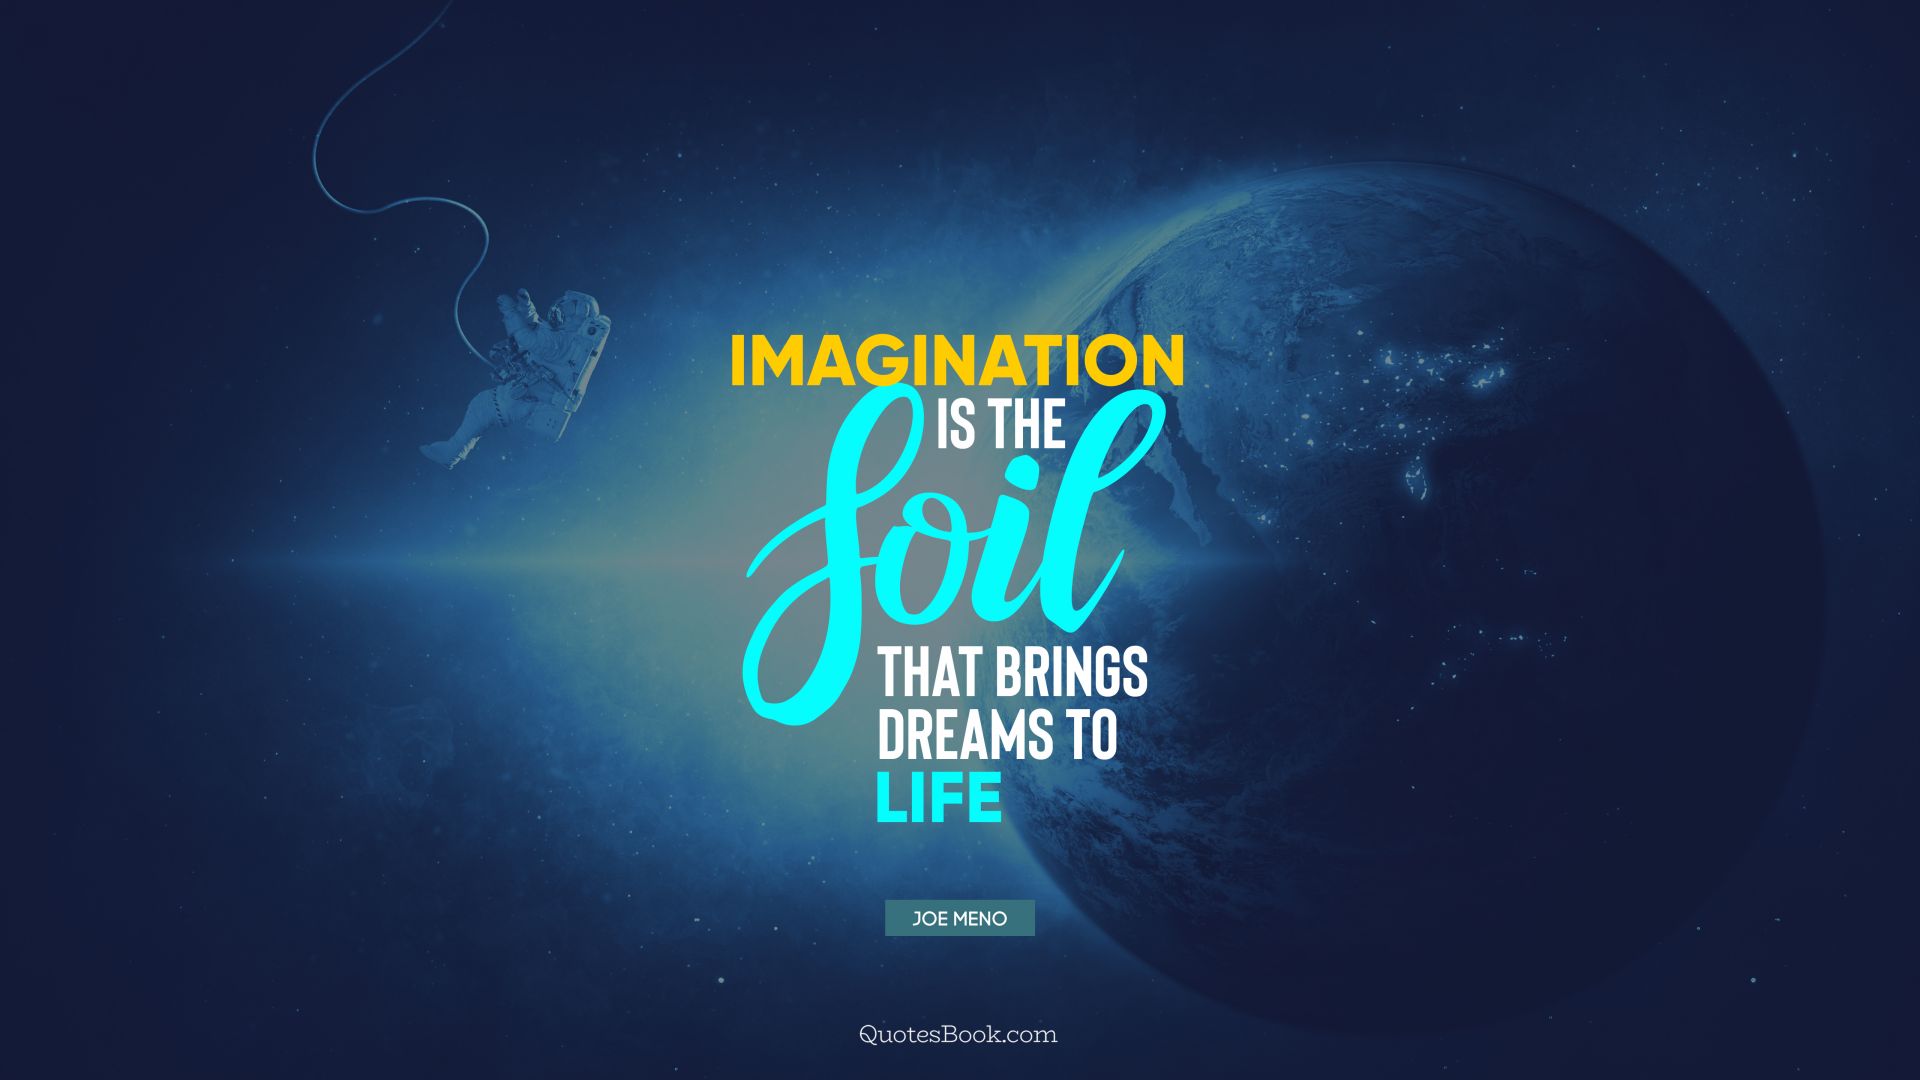 Imagination is the soil that brings dreams to life. - Quote by Joe Meno